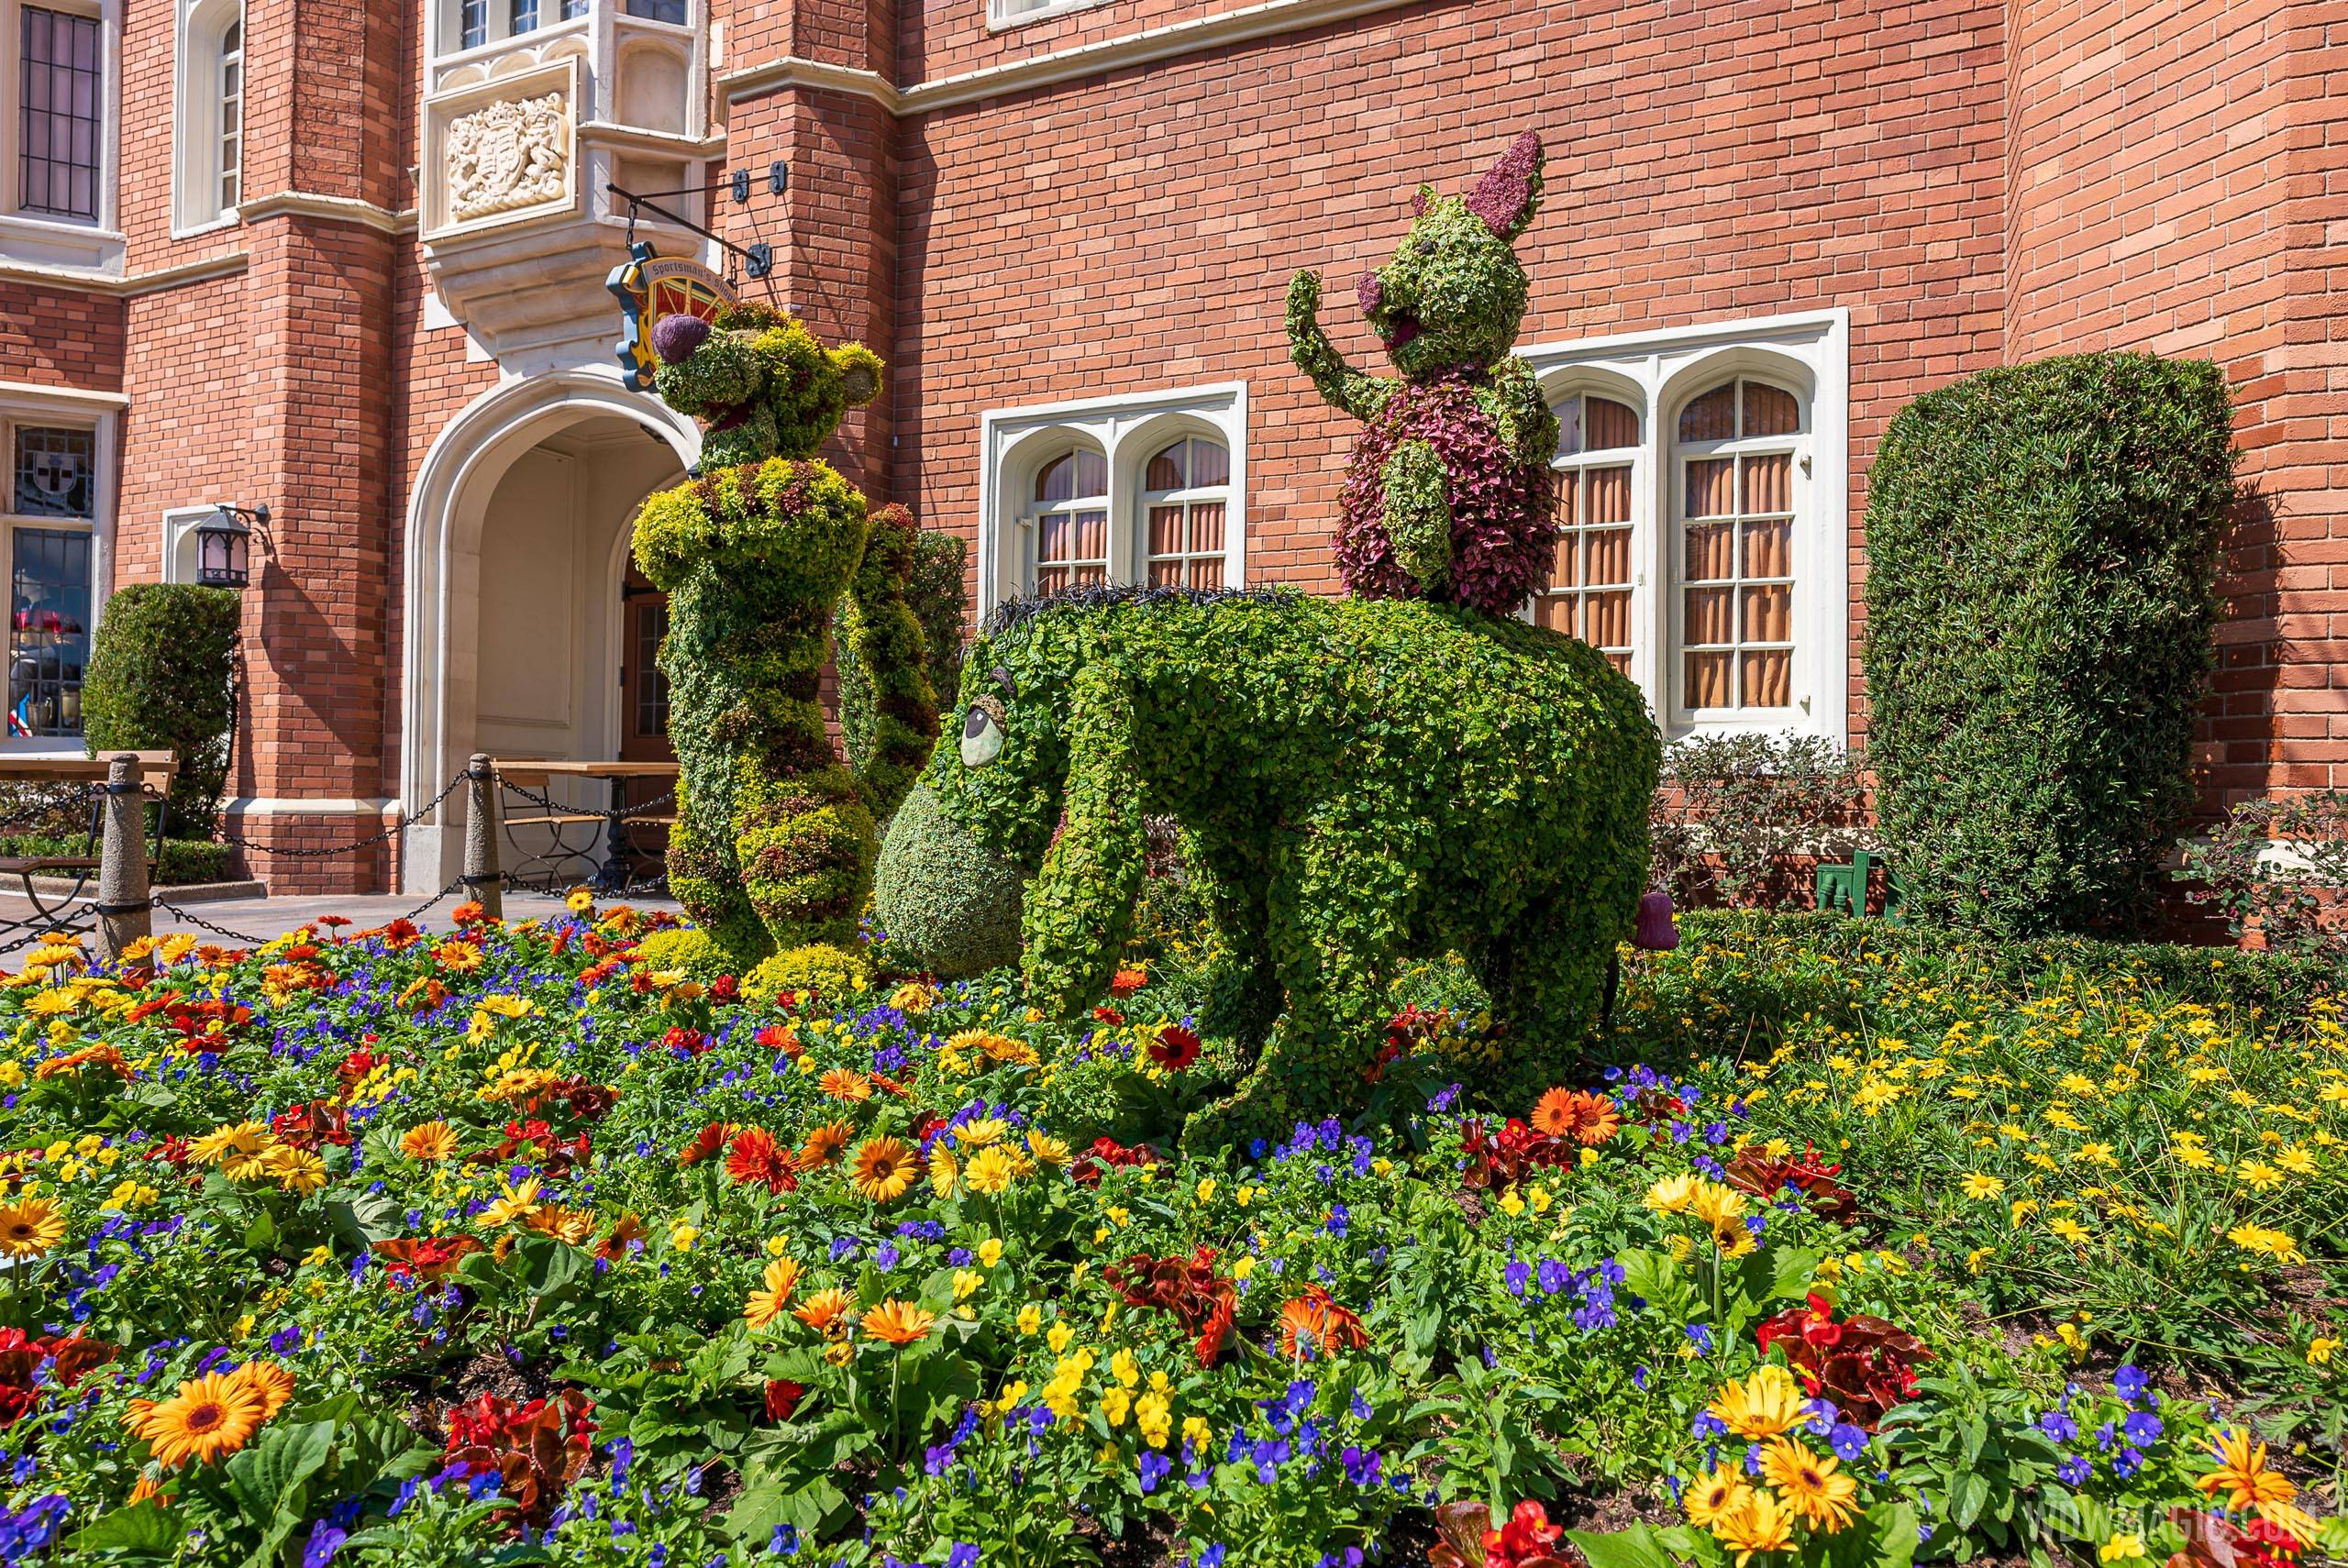 Winnie the Pooh and Friends (Rabbit, Eeyore, Piglet and Tigger) – United Kingdom Pavilion